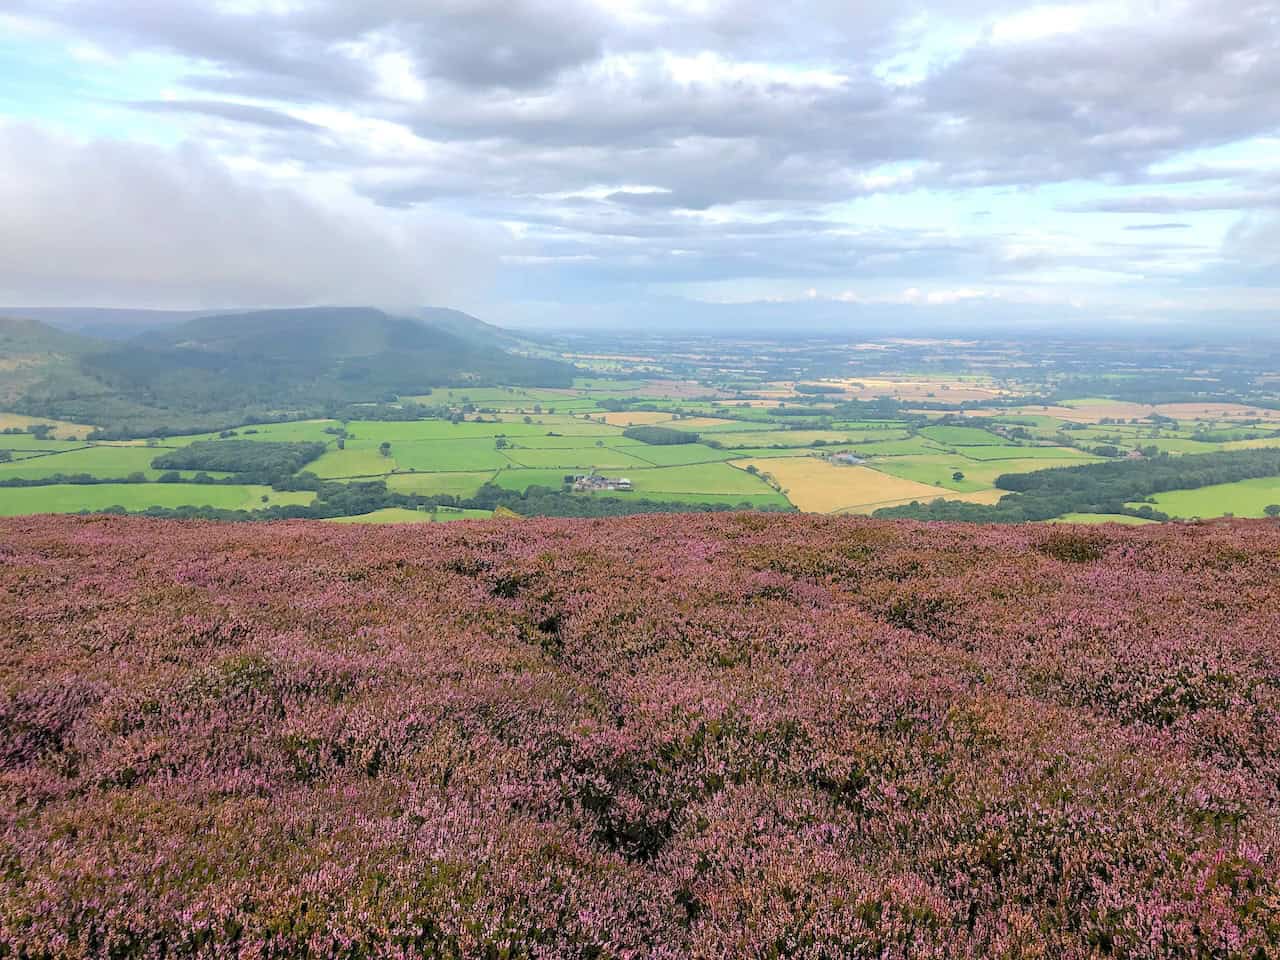 The view west from Ingleby Moor over the Vale of Mowbray highlights the area's natural beauty.